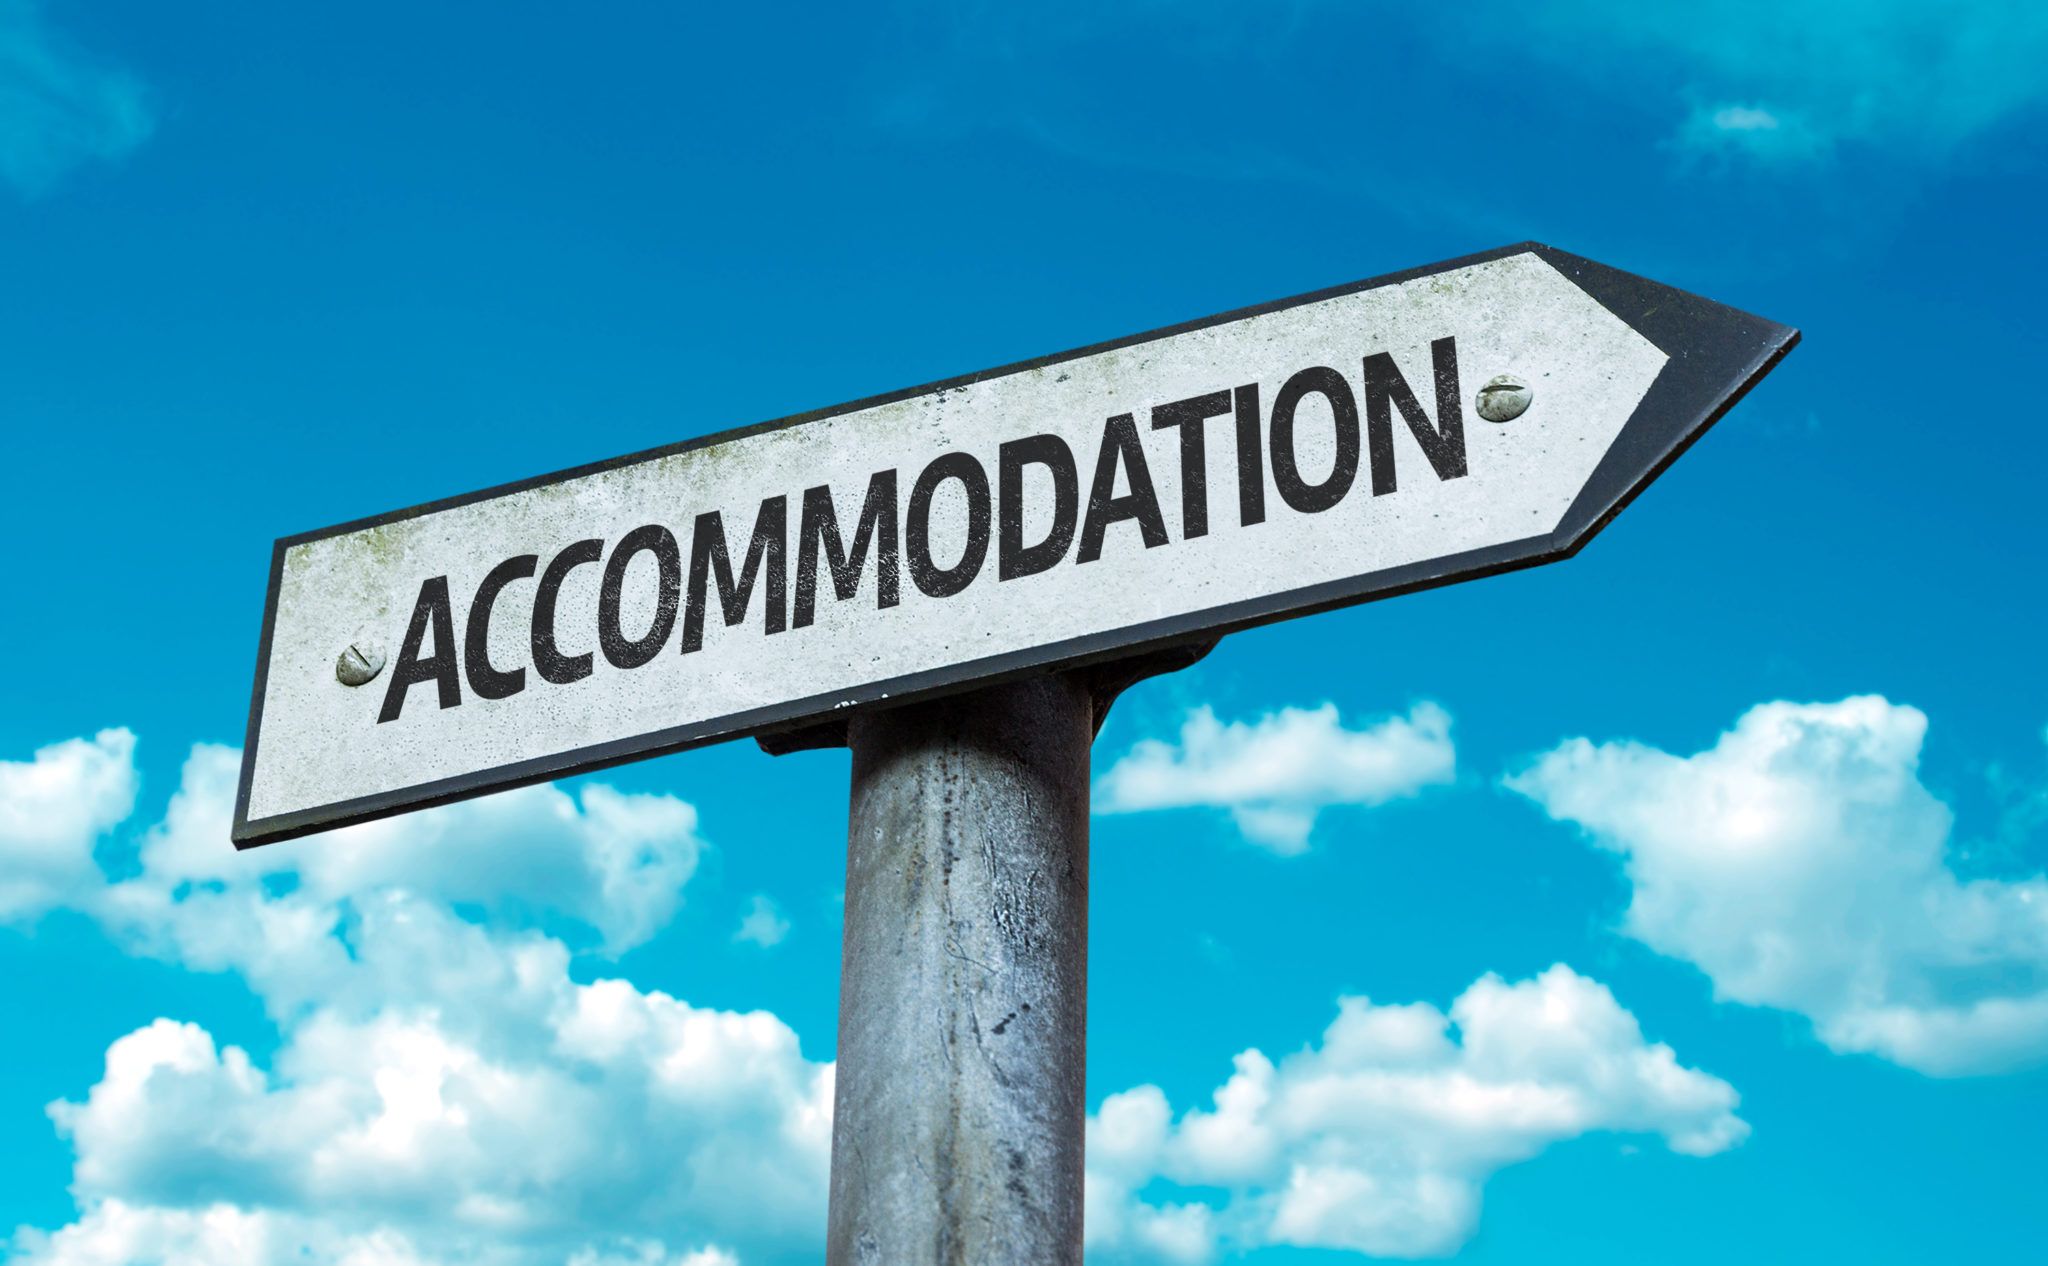 Looking for accommodation ahead of the return to college in September? Give this video a watch